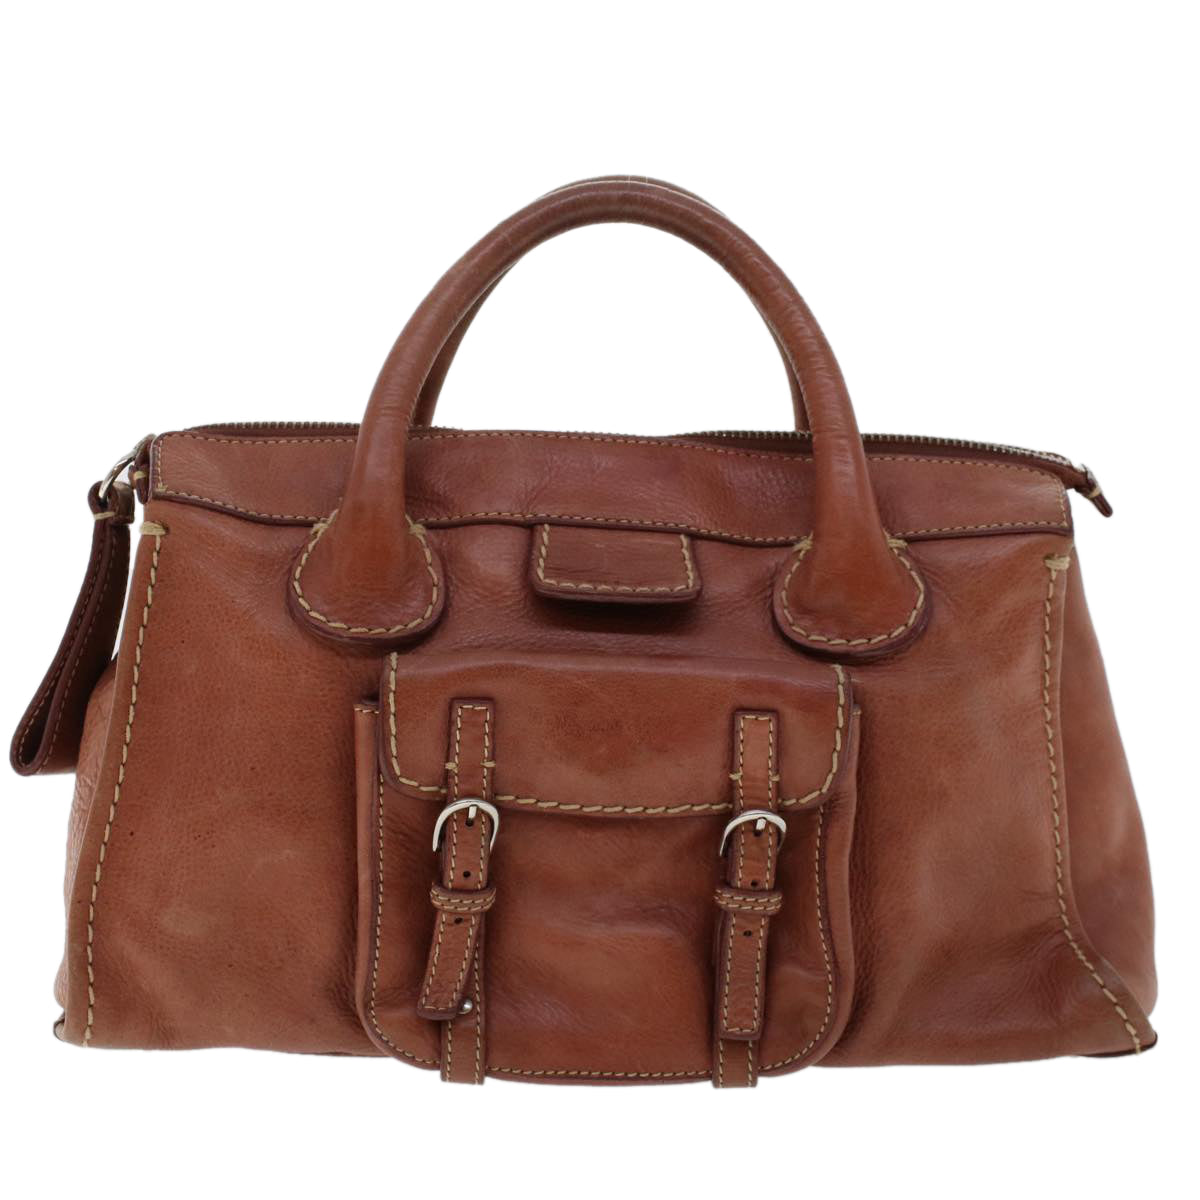 Chloe Hand Bag Leather Brown 02-05-53 Auth bs6748